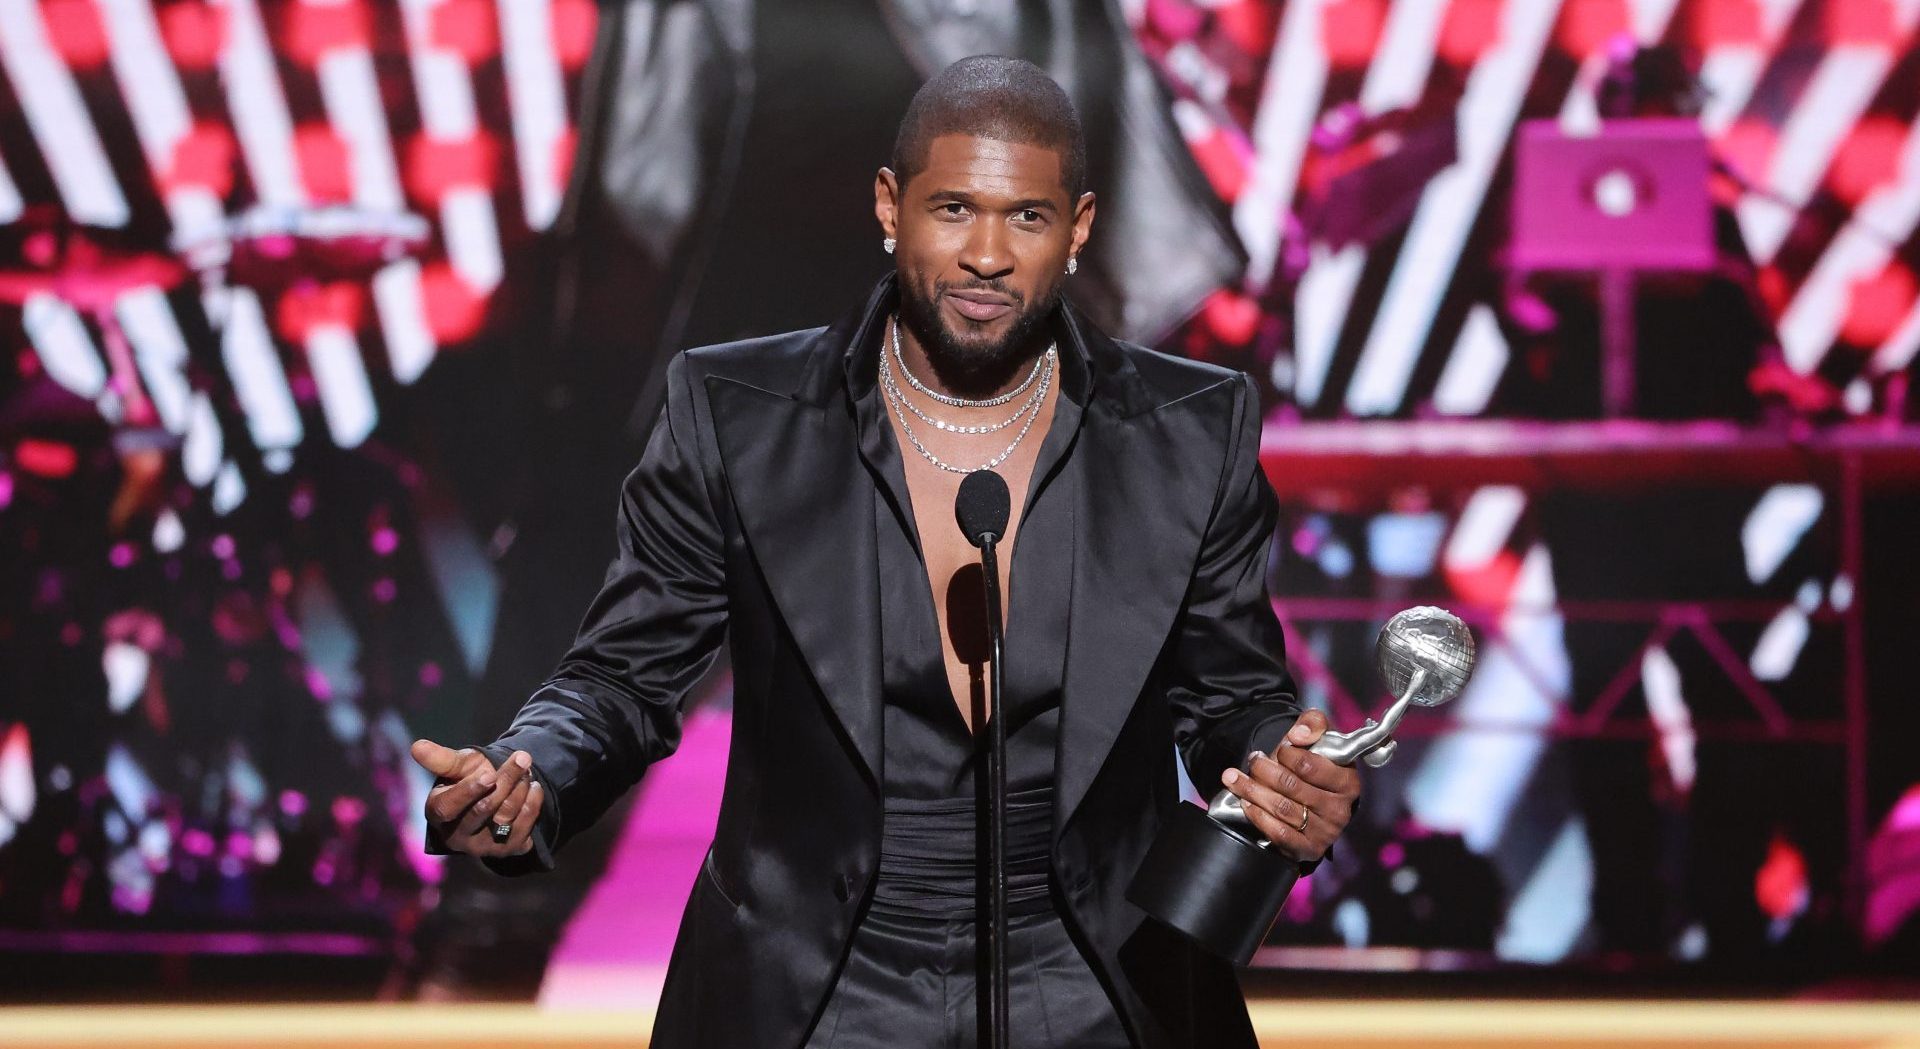 Oop! Usher Pops Off On Content Creator For Suggesting He “Almost Thanked The Devil” In A Speech thumbnail